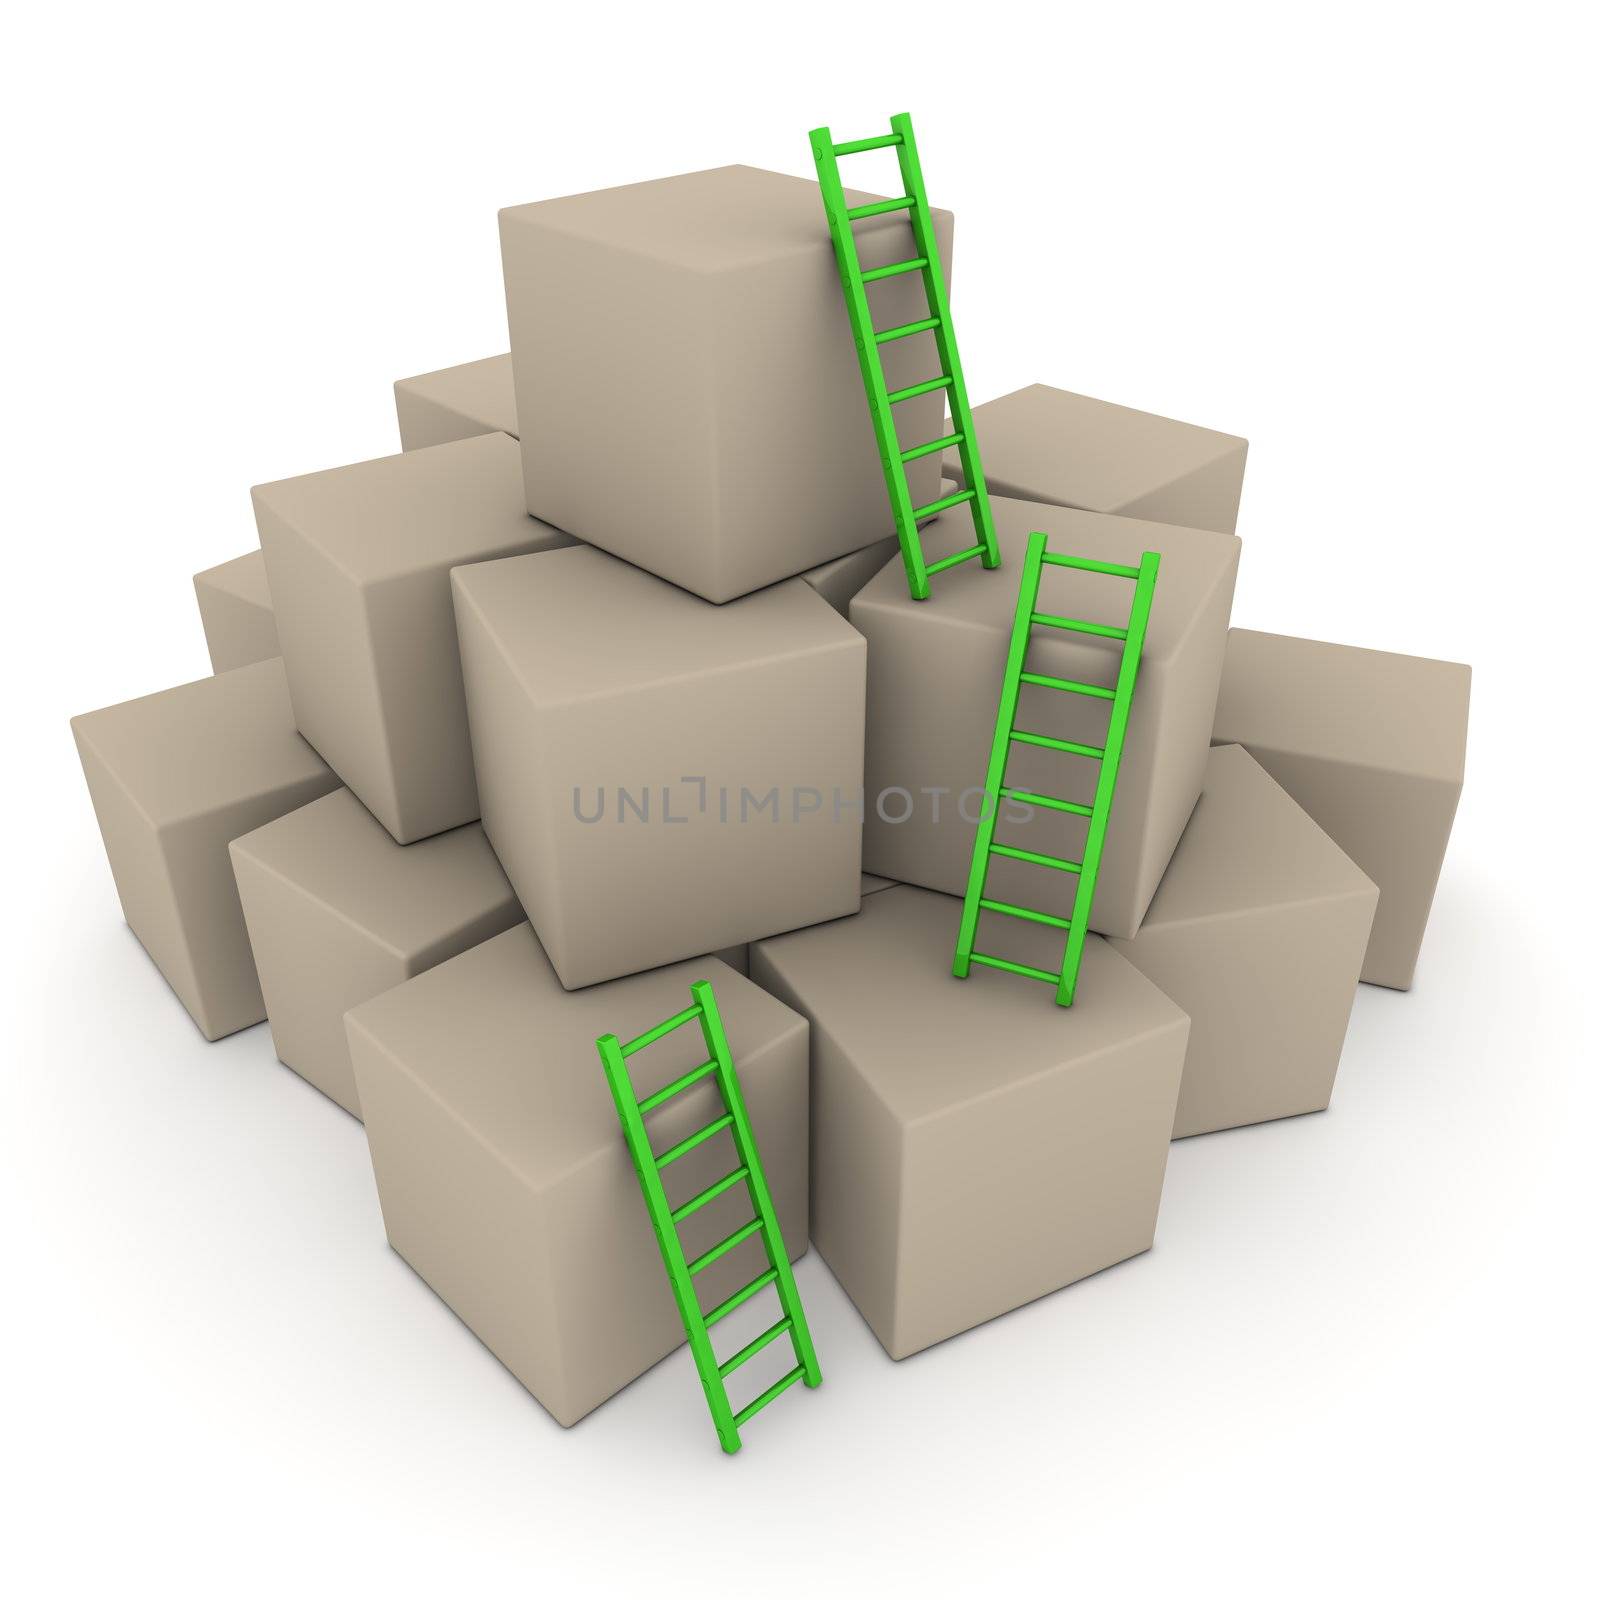 Batch of Boxes - Climb up with Glossy Green Ladders by PixBox